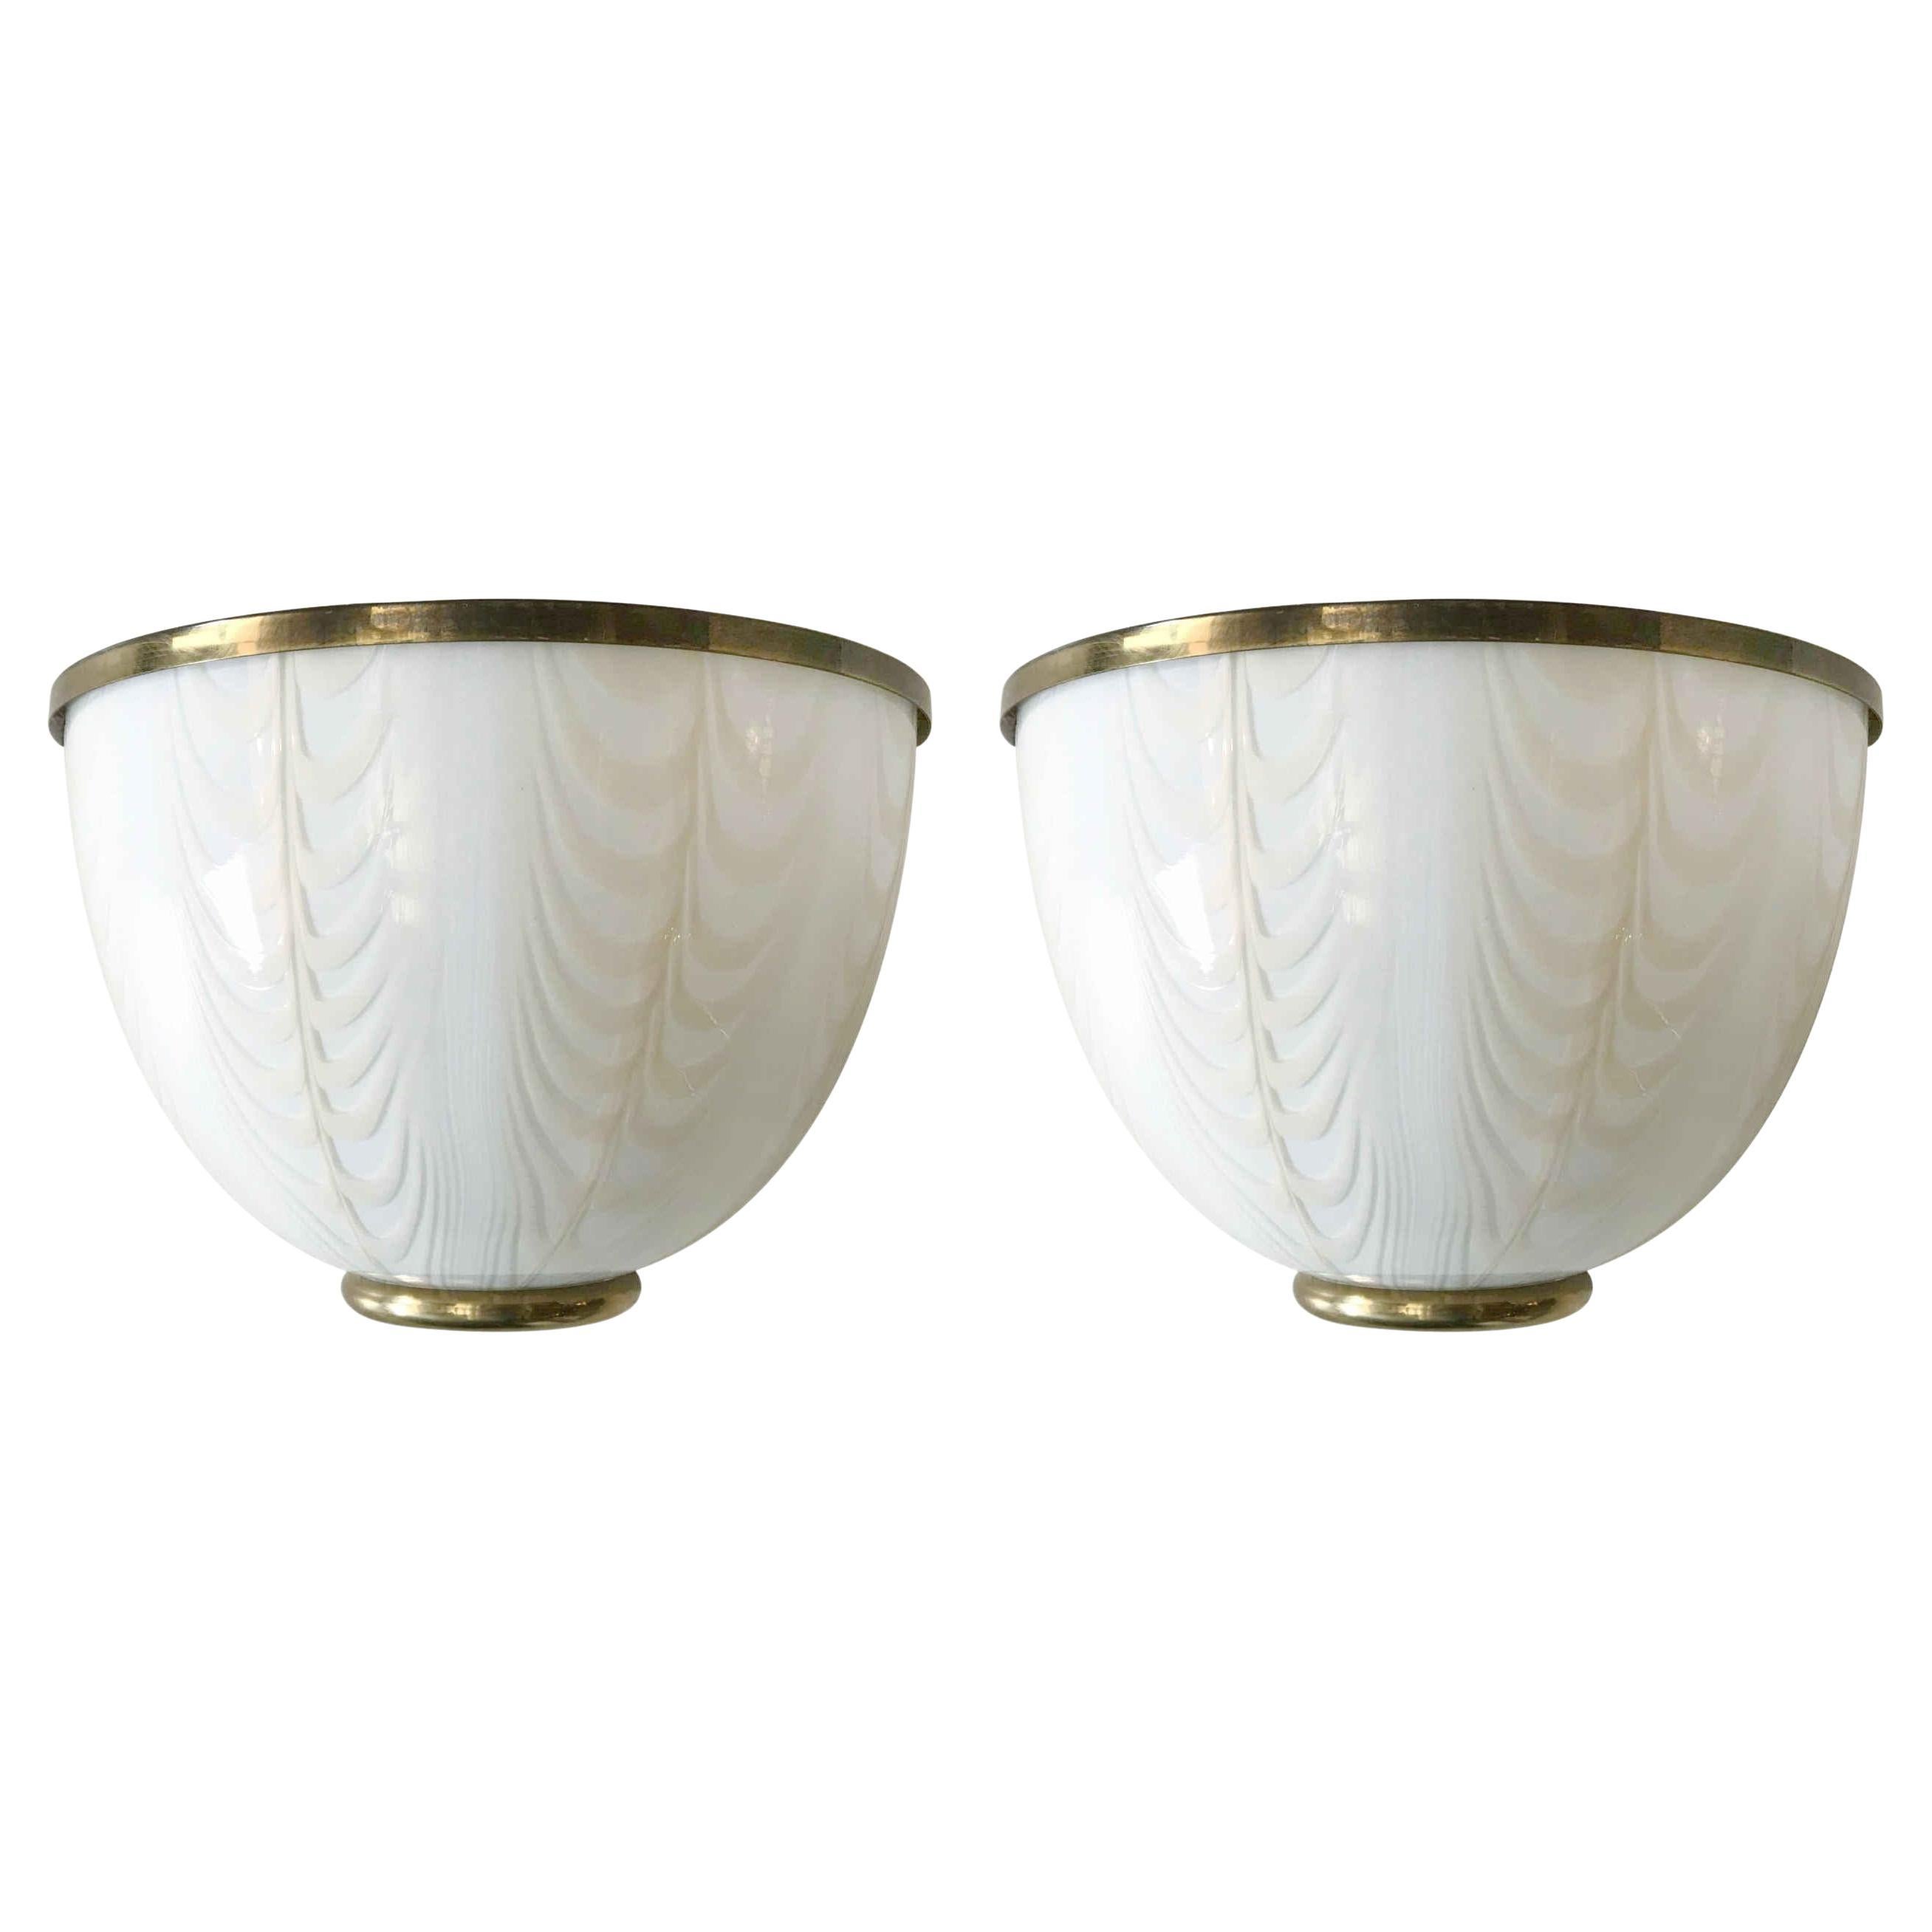 Pair of Murano Sconces by Fabbian for Mazzega - 2 Pairs Available